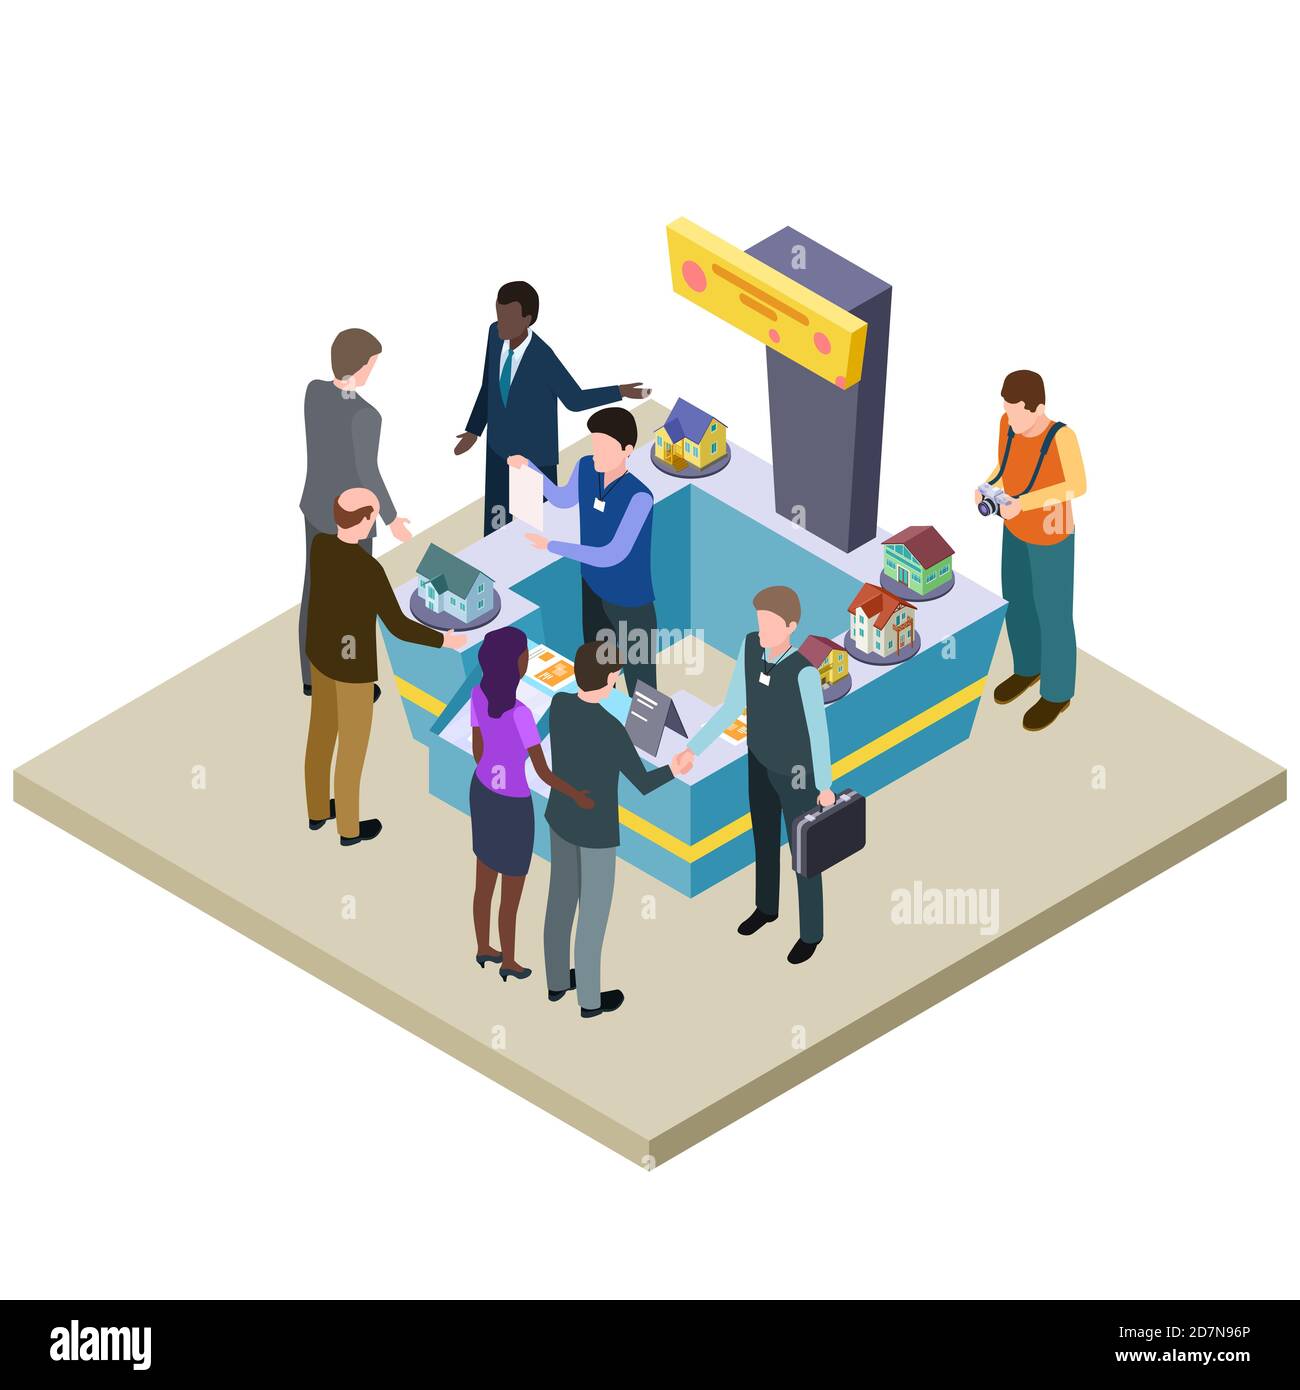 Real Estate exhibition isometric vector illustration. Exhibition architecture 3d, building model Stock Vector